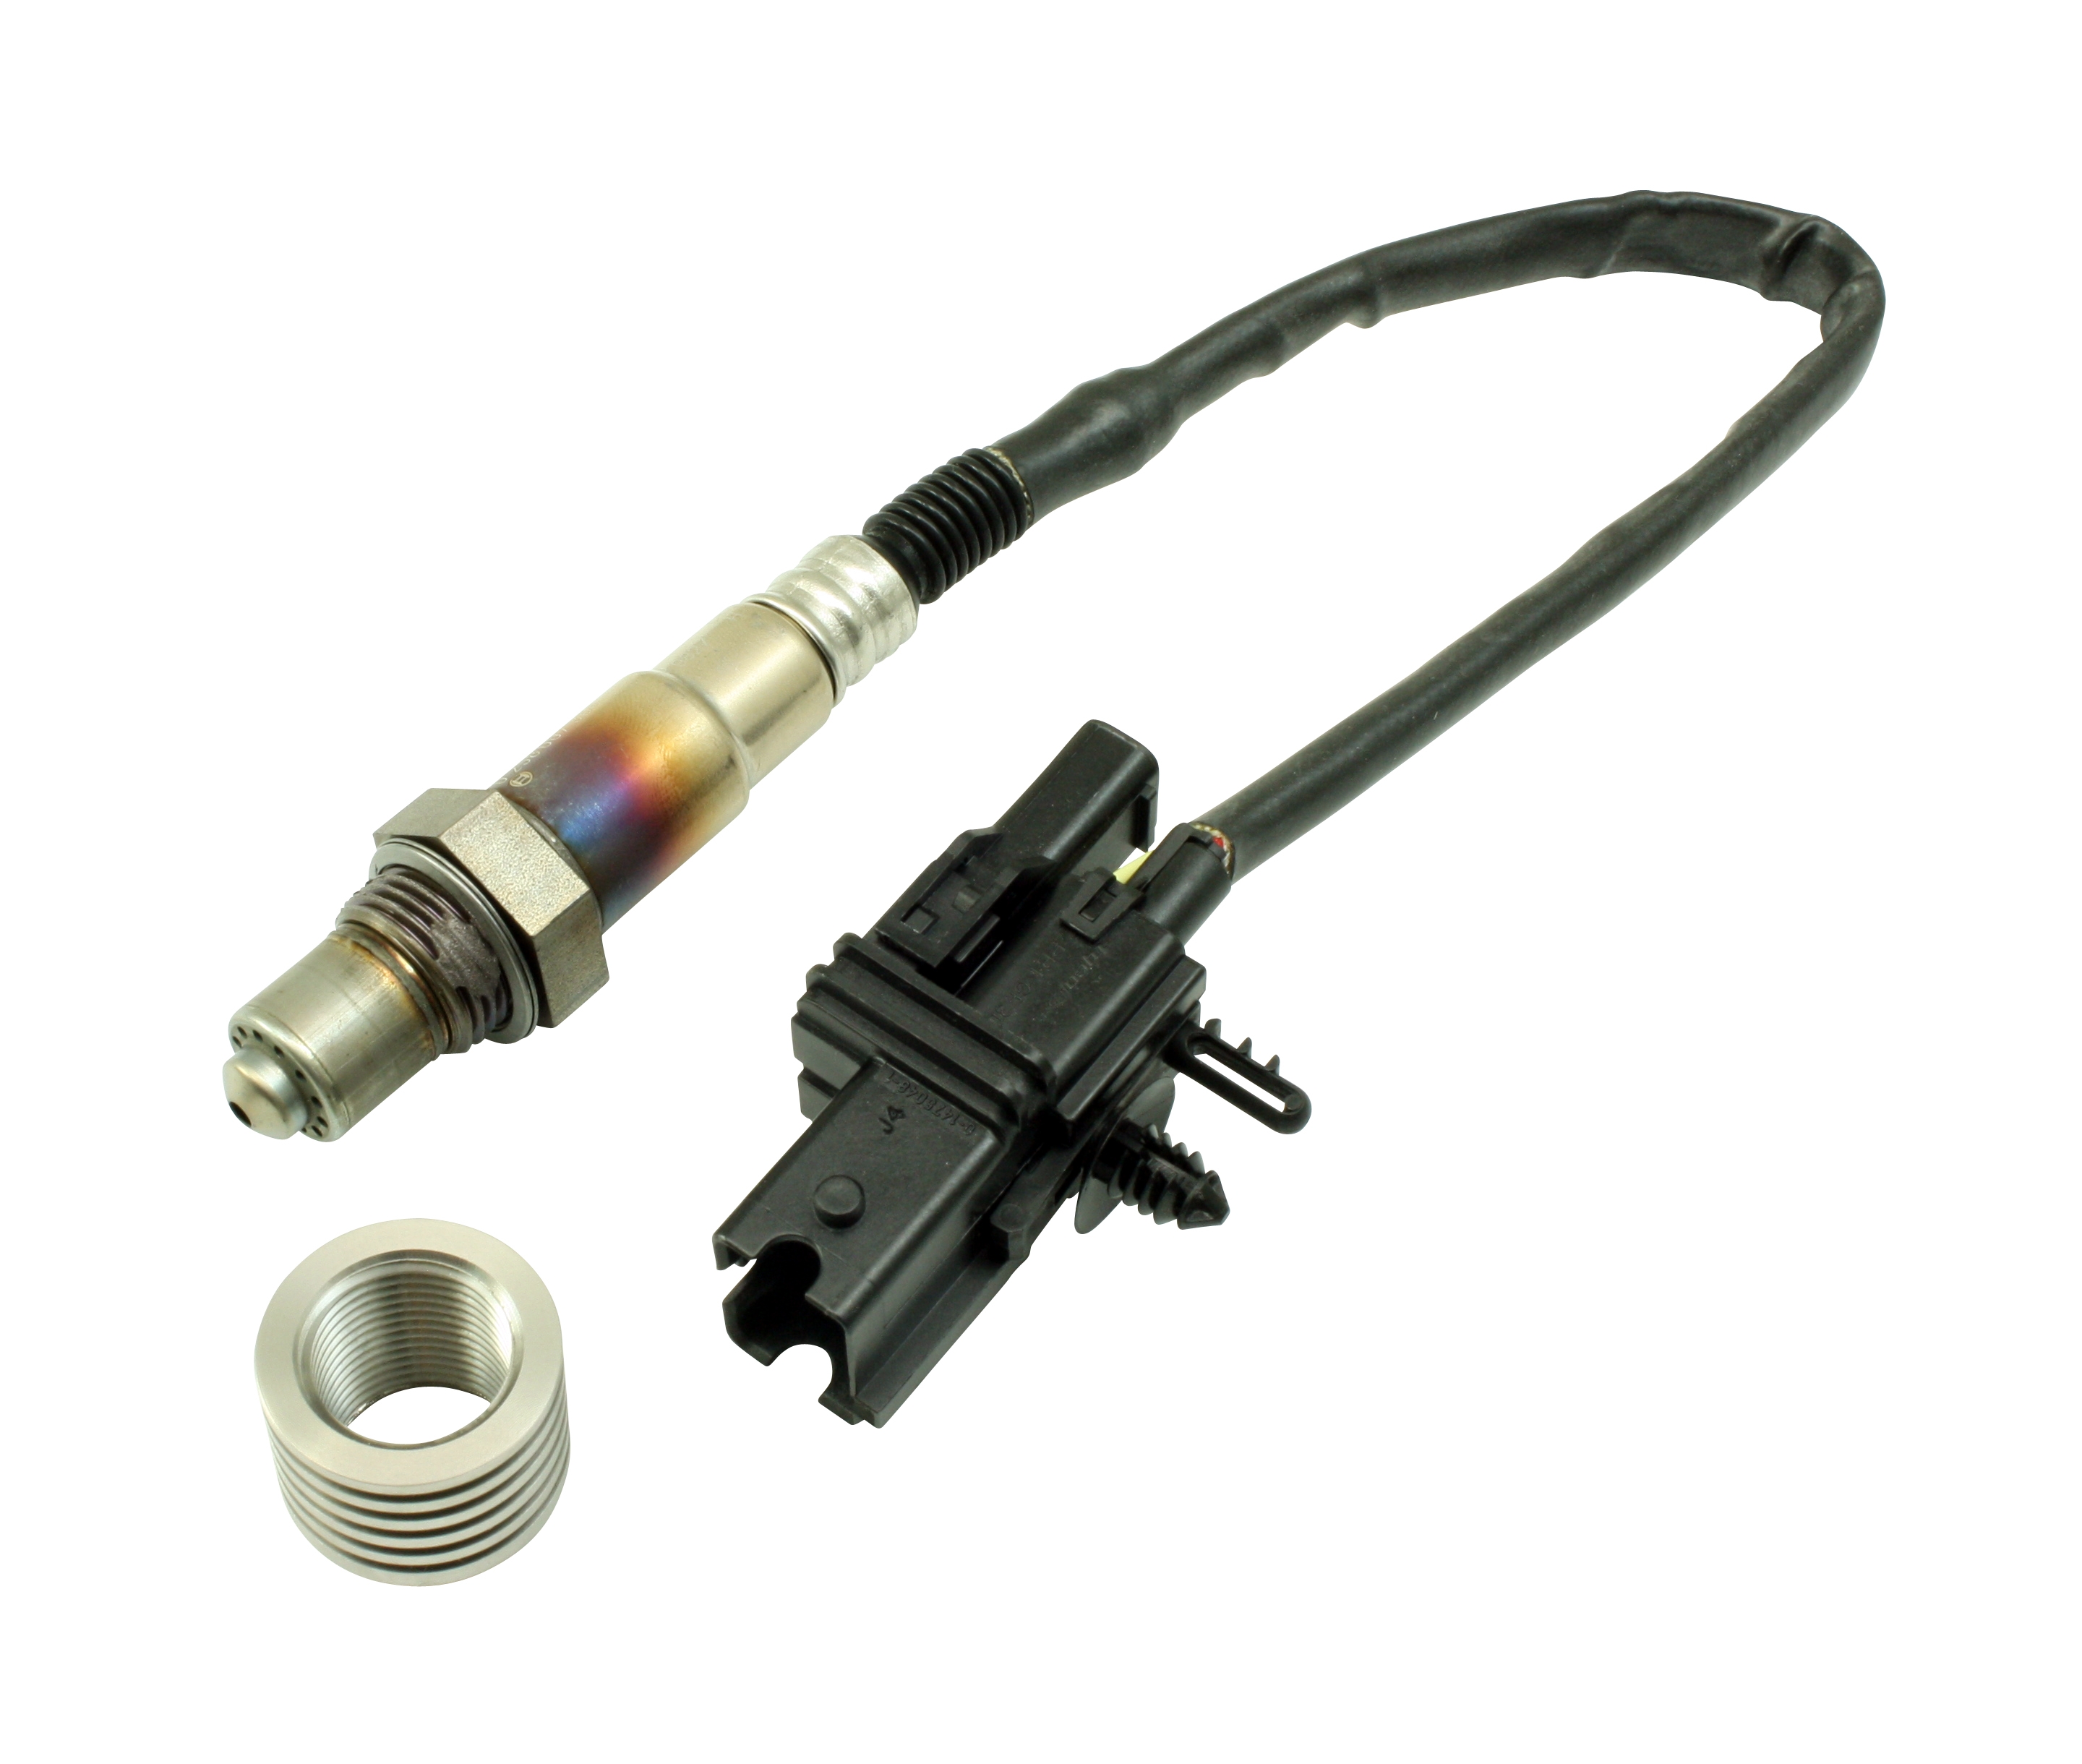 AEM Wideband UEGO Sensor with Stainless Tall Manifold Bung Install Kit - 4 Channel Wideband